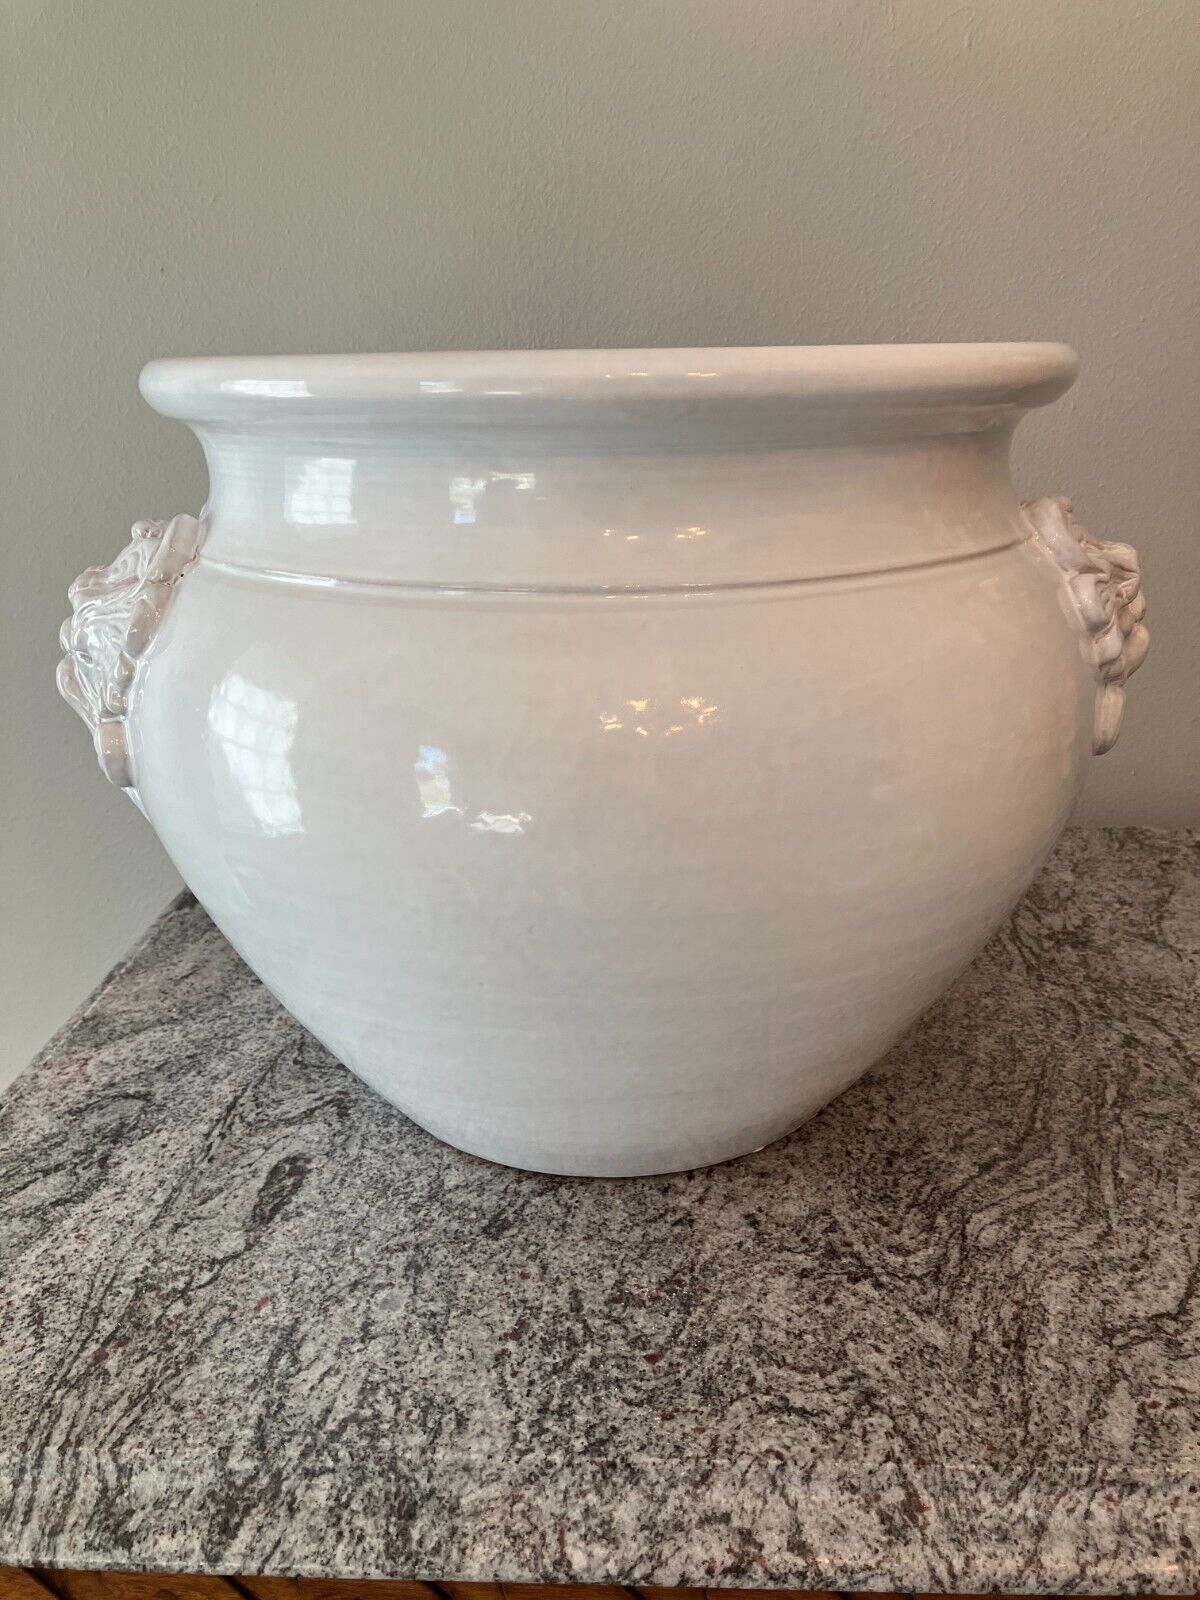 GUMPS. Elegant White Planter, BN Condition, made in Italy, DISCONTINUED, LARGE